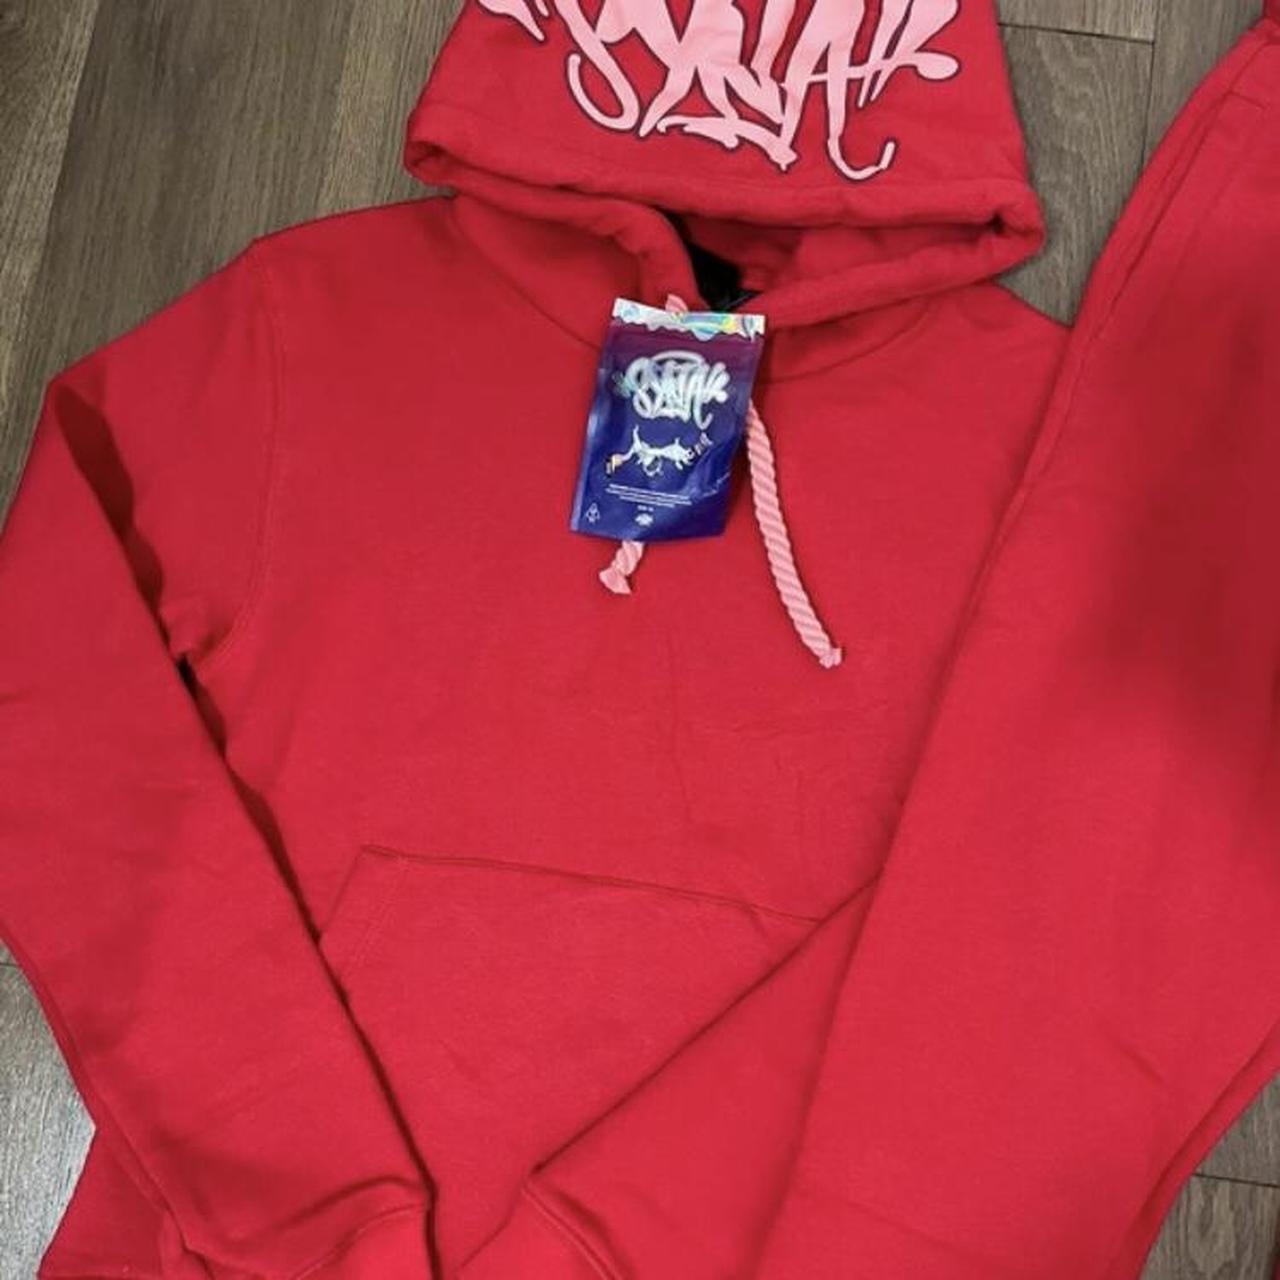 Syna World tracksuit Red New with tags never worn... - Depop